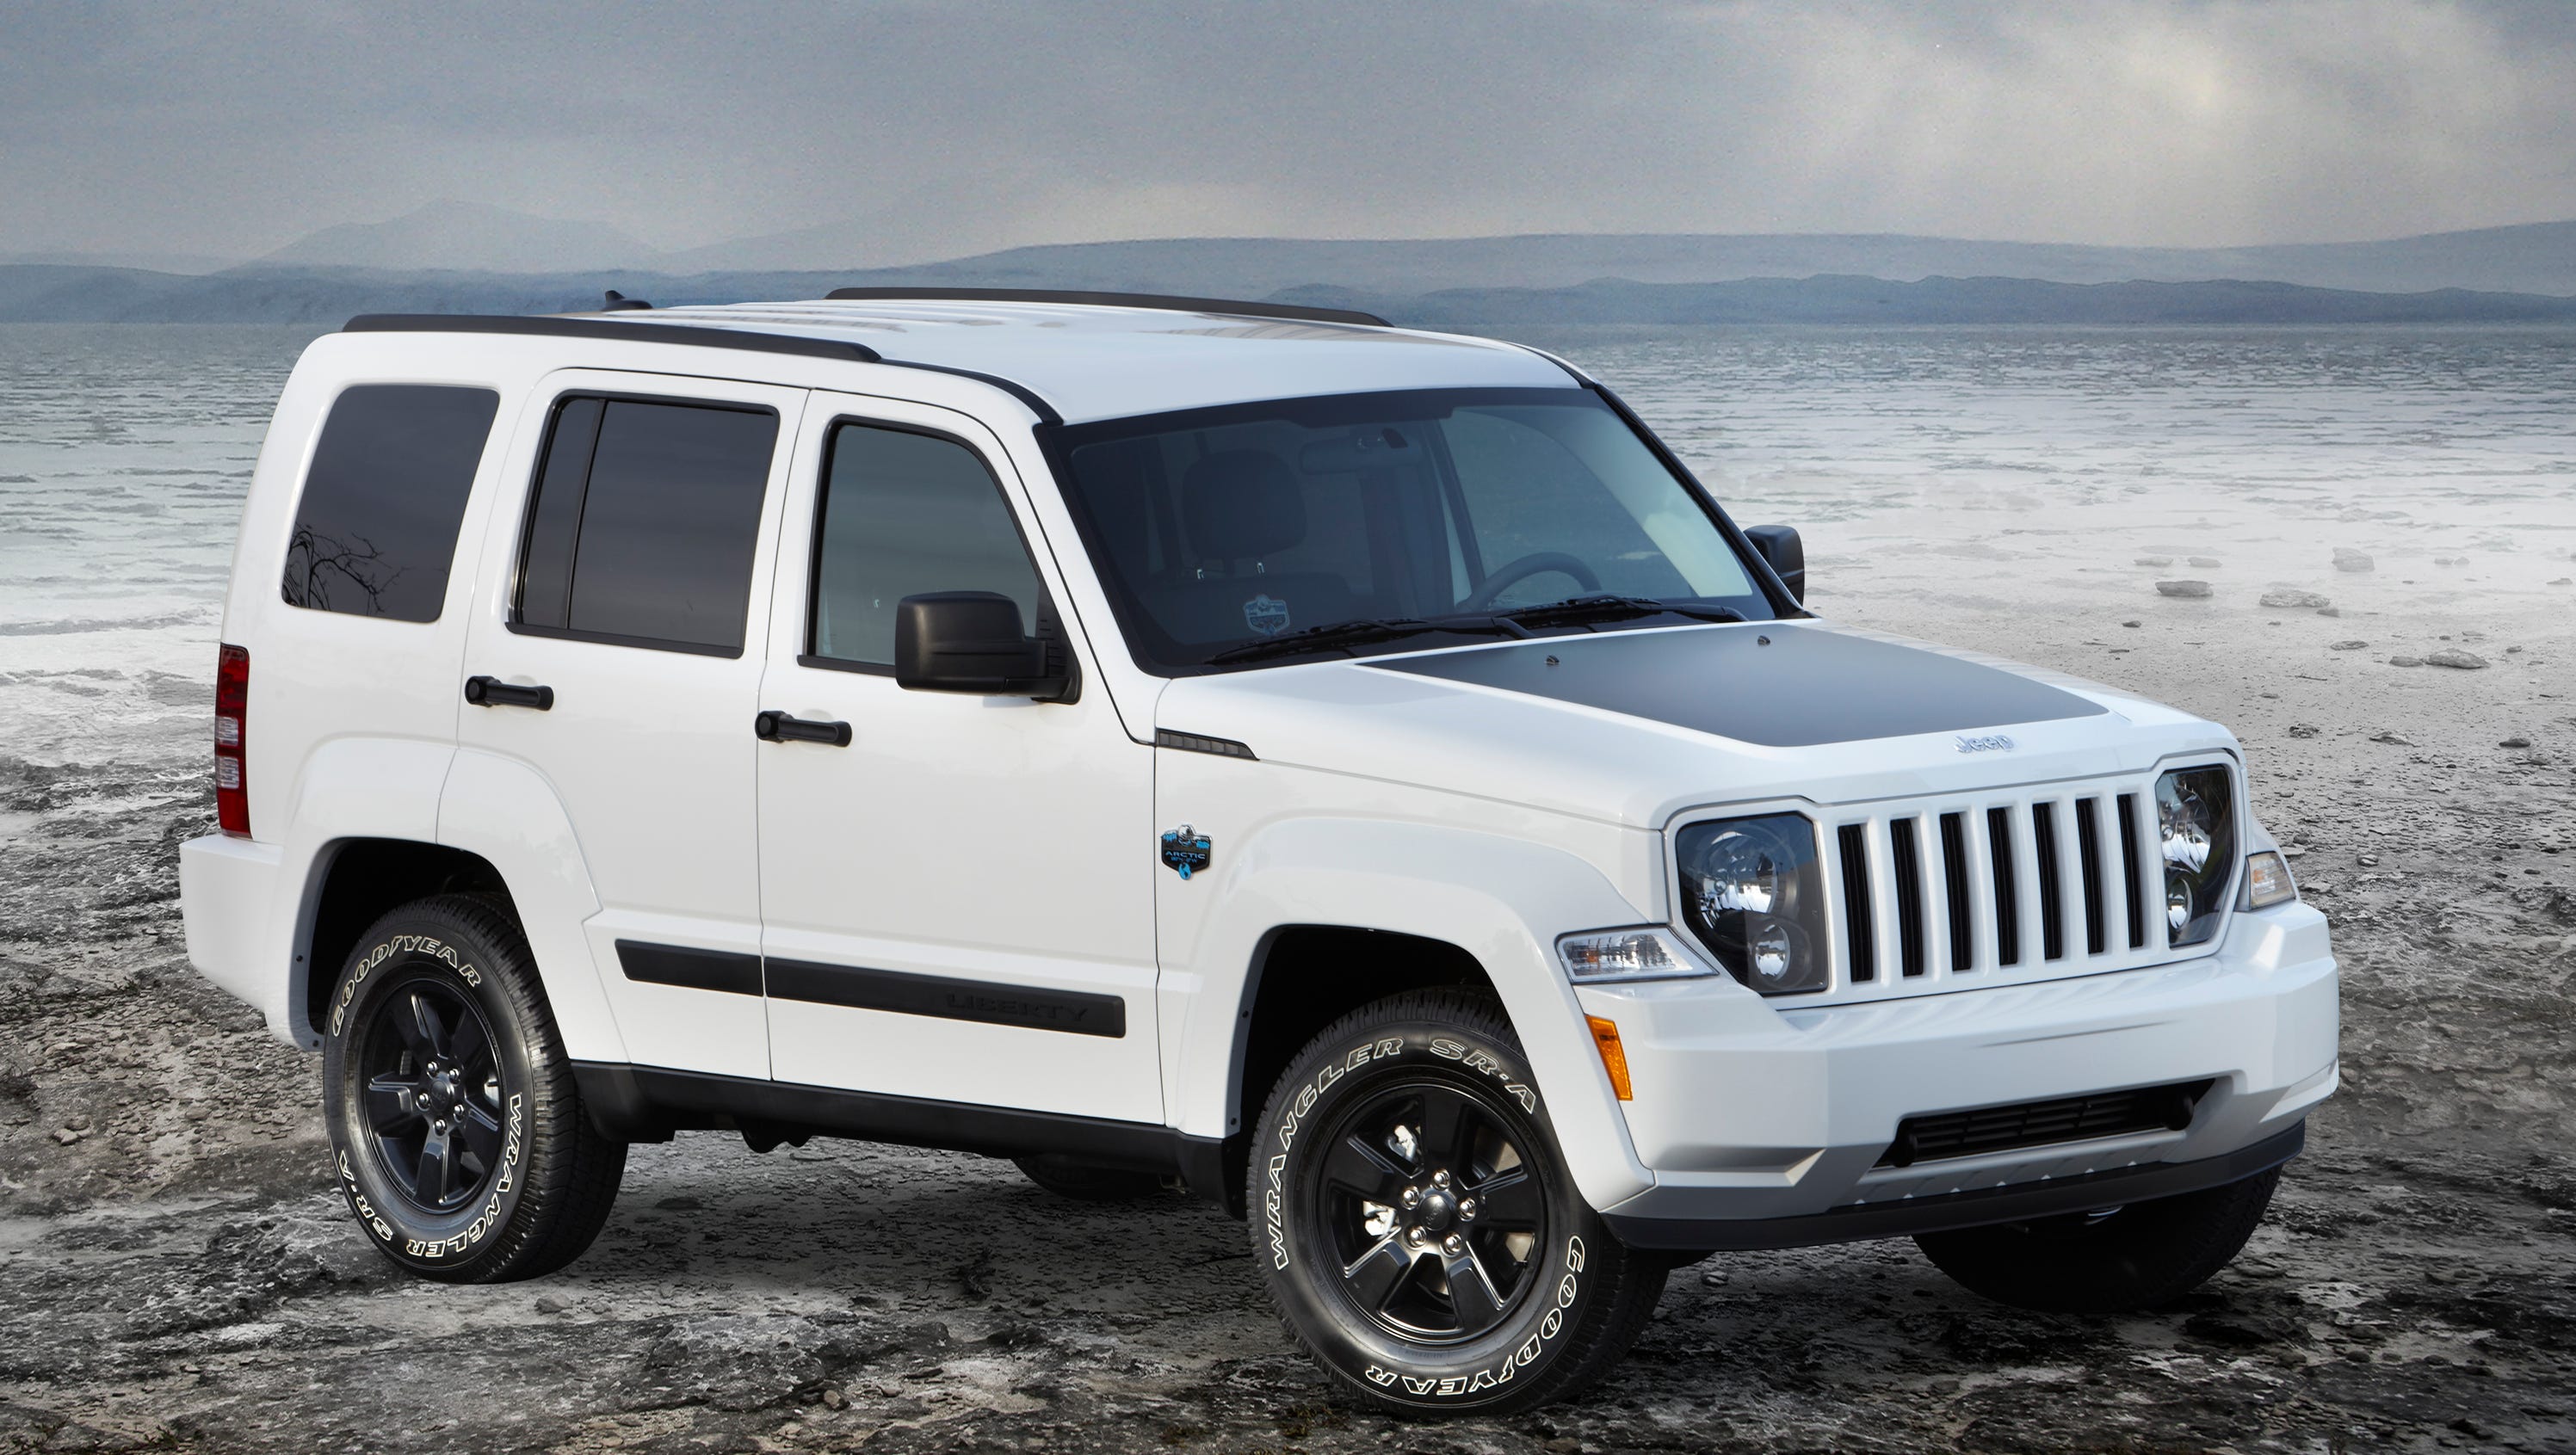 Air bag computer failures in 2012 Jeep Liberty probed, NHTSA says